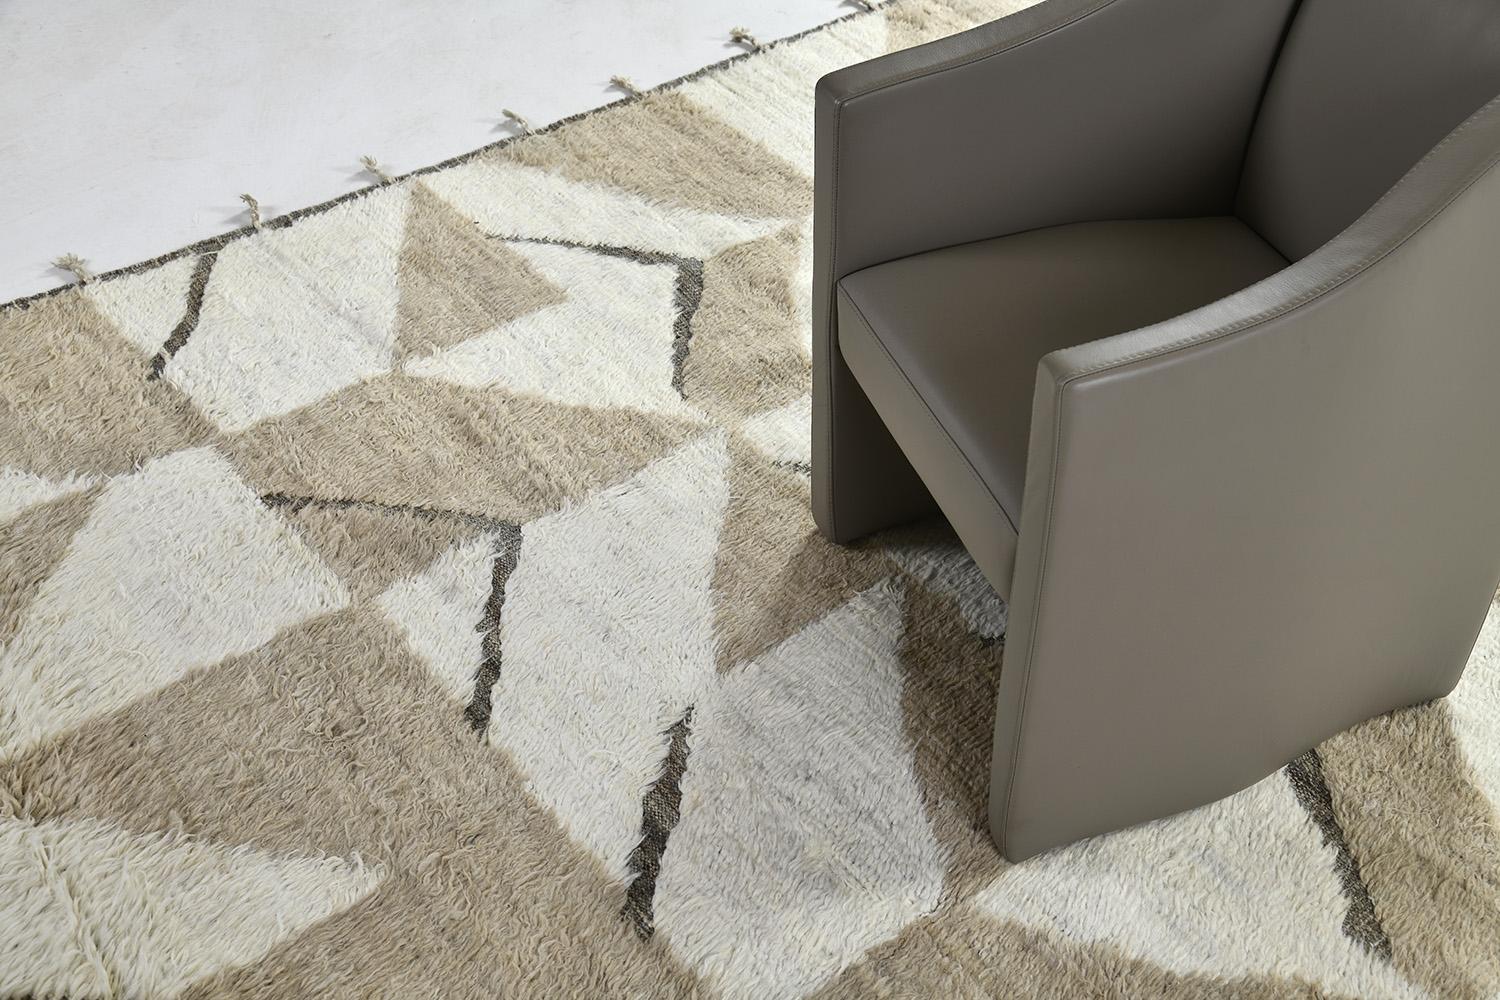 Calcere uses geometric repeating patterns across the border. Khaki, charcoal, and the perfect shade of ivory make up a short shag surface with a natural earth-toned flat weave underlying the embossed detailing.


Rug number: 28886
Size: 8' 8